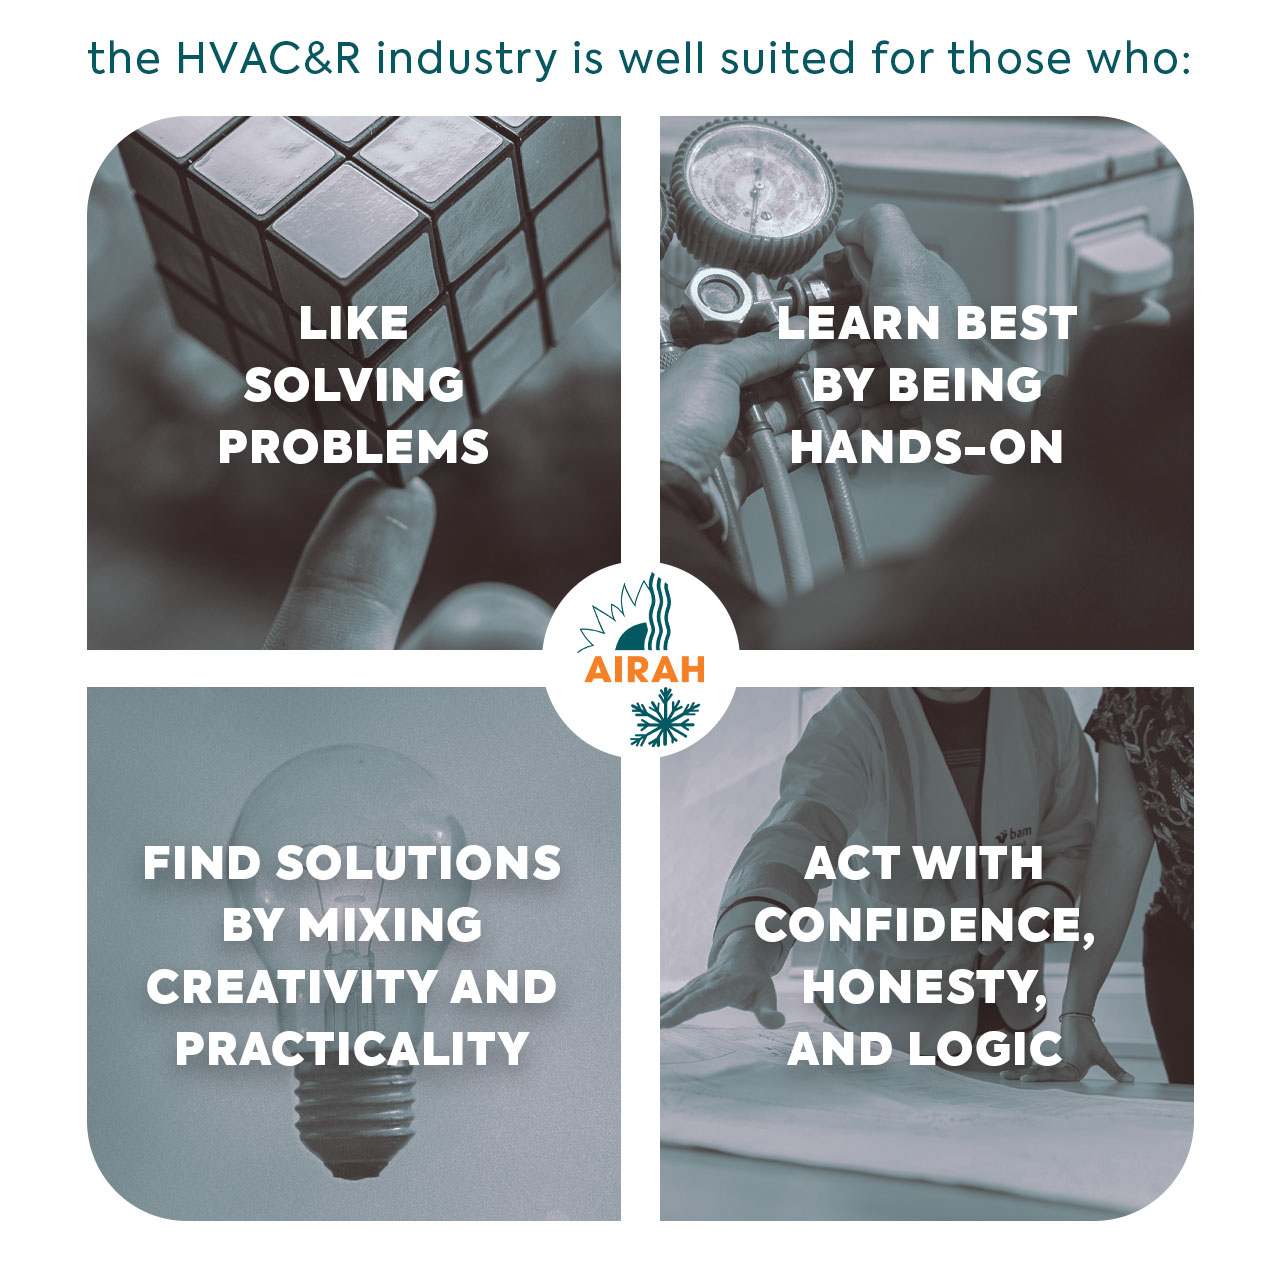 The HVAC&R industry is suitable for hands-on problem solvers